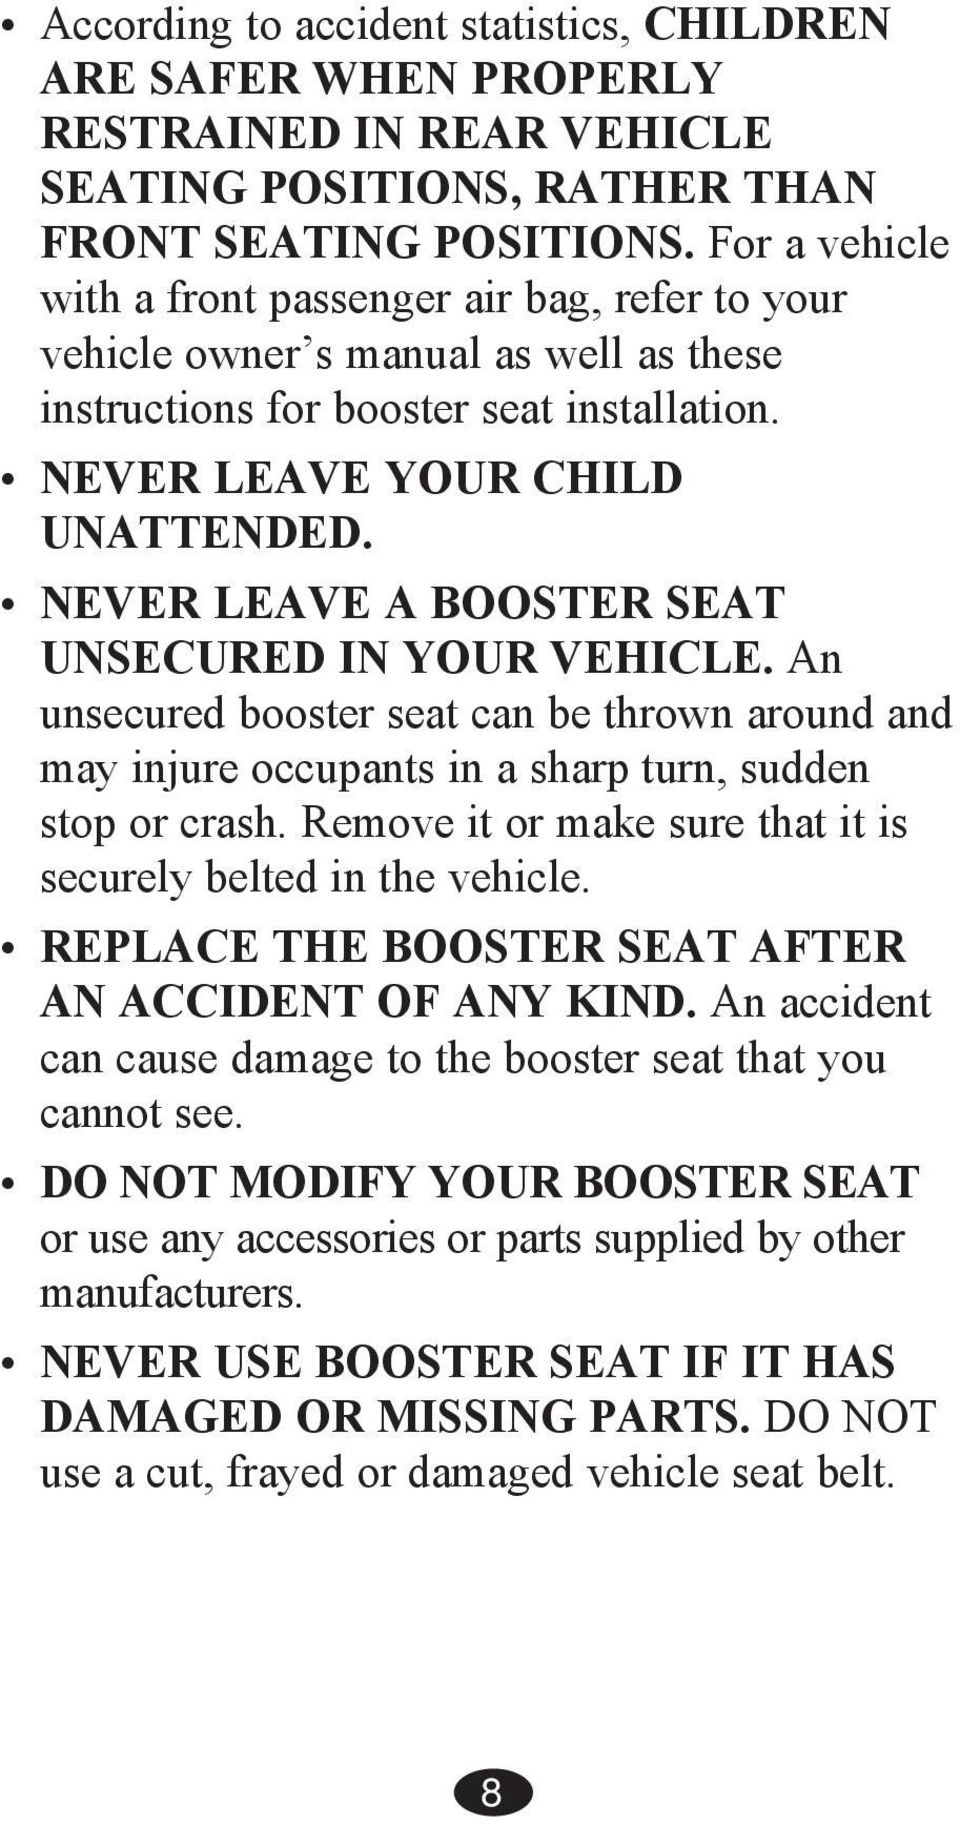 NEVER LEAVE A BOOSTER SEAT UNSECURED IN YOUR VEHICLE. An unsecured booster seat can be thrown around and may injure occupants in a sharp turn, sudden stop or crash.